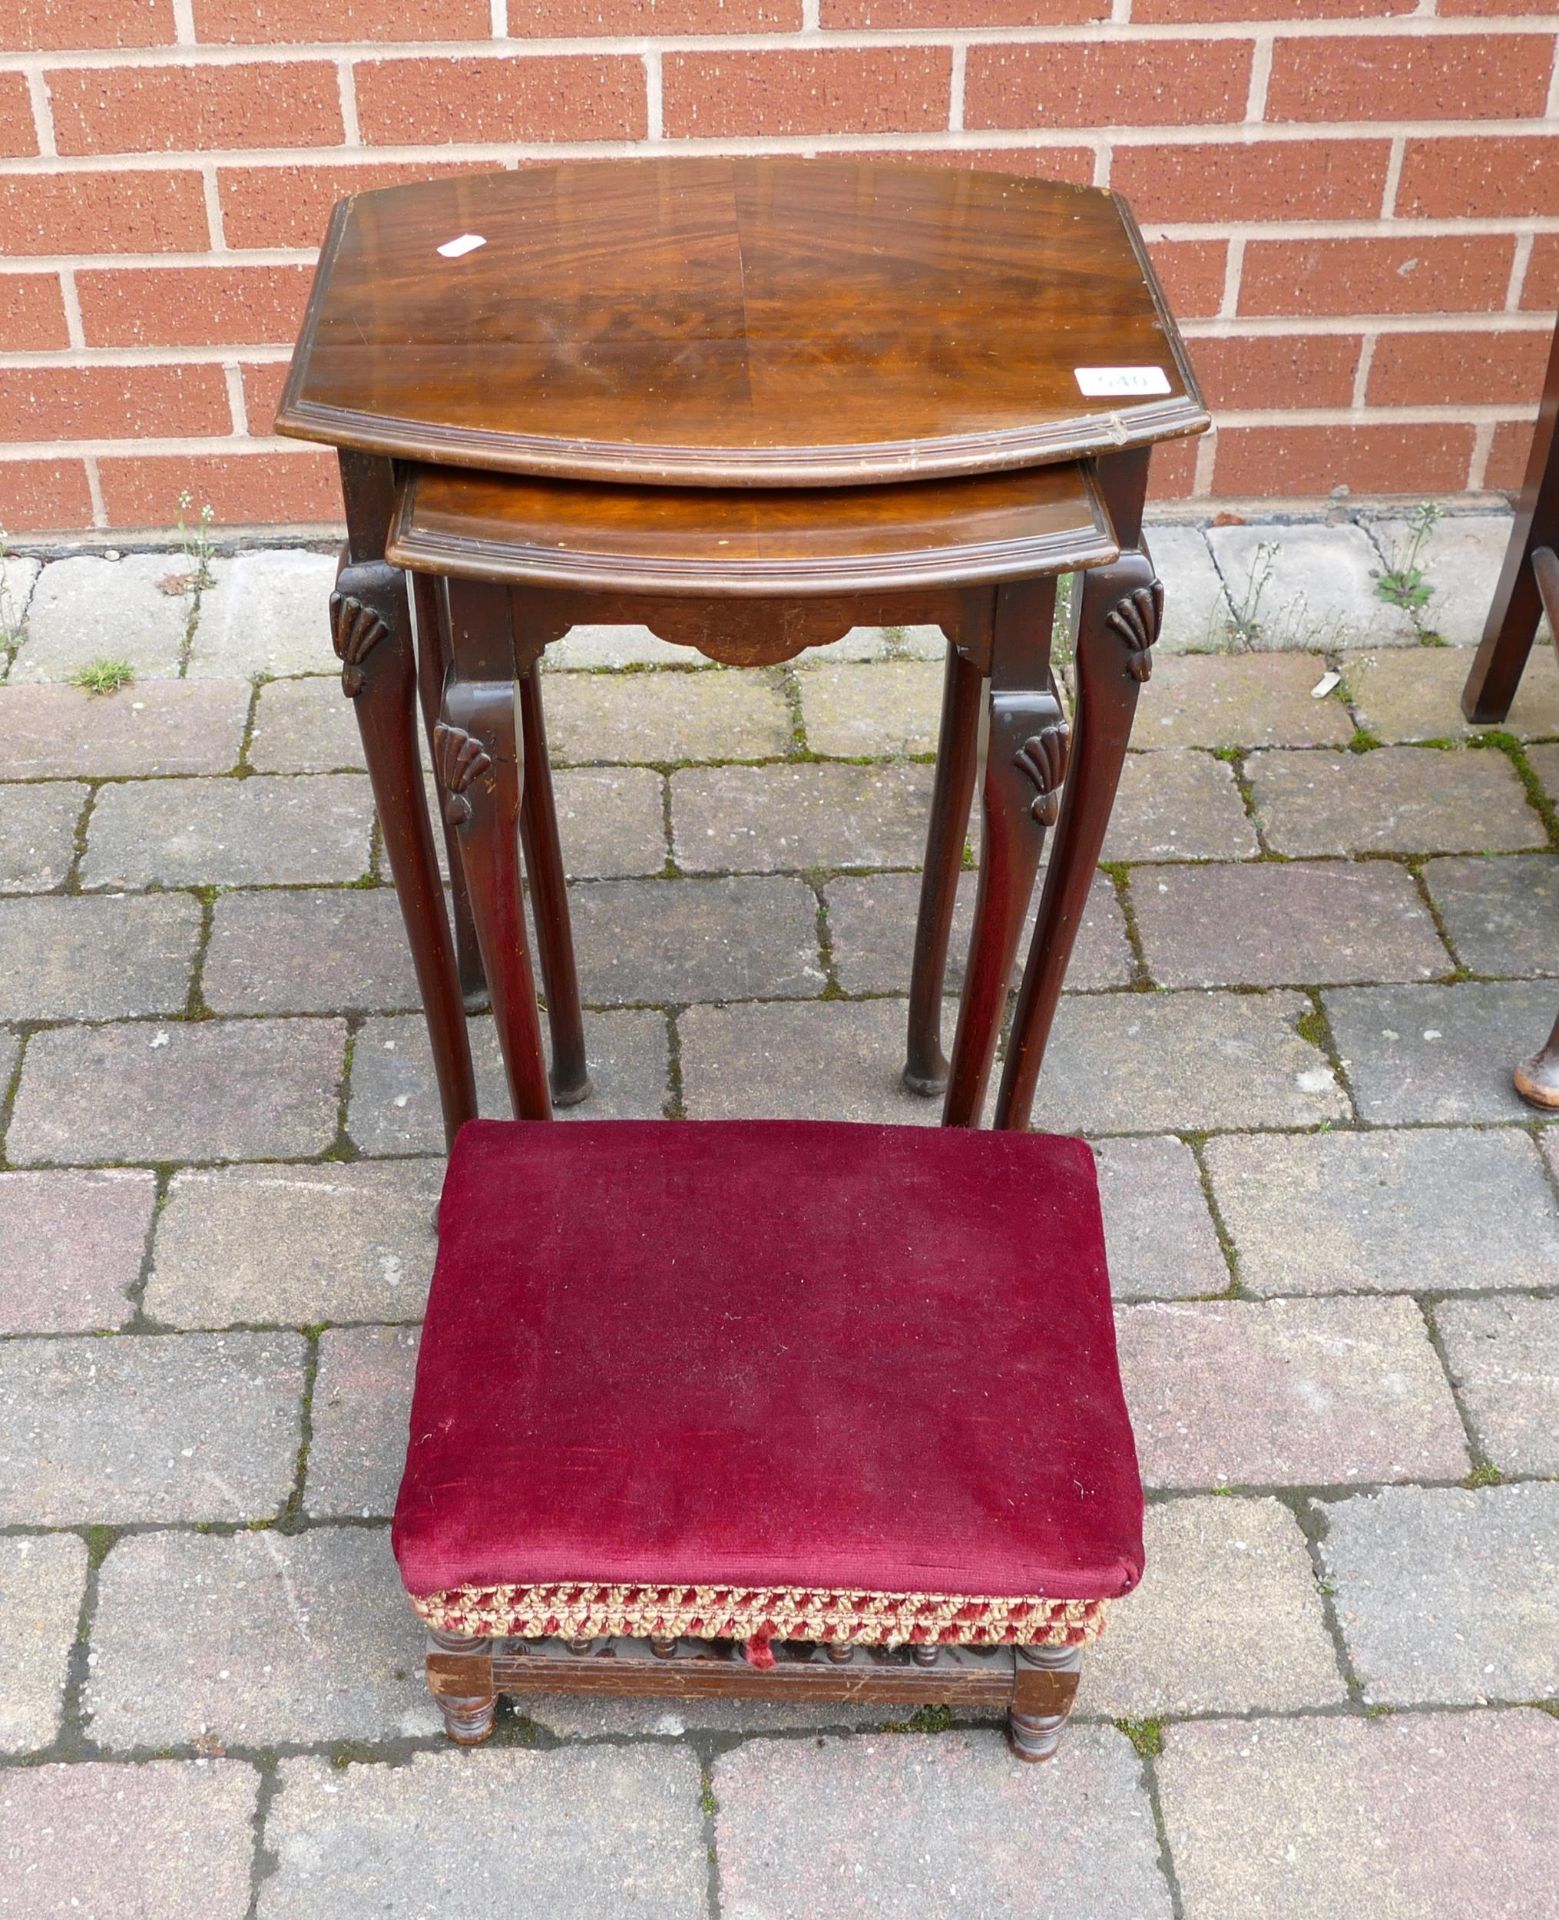 Upholstered Antique foot stool & nest of 2 later tables(2) - Image 2 of 2